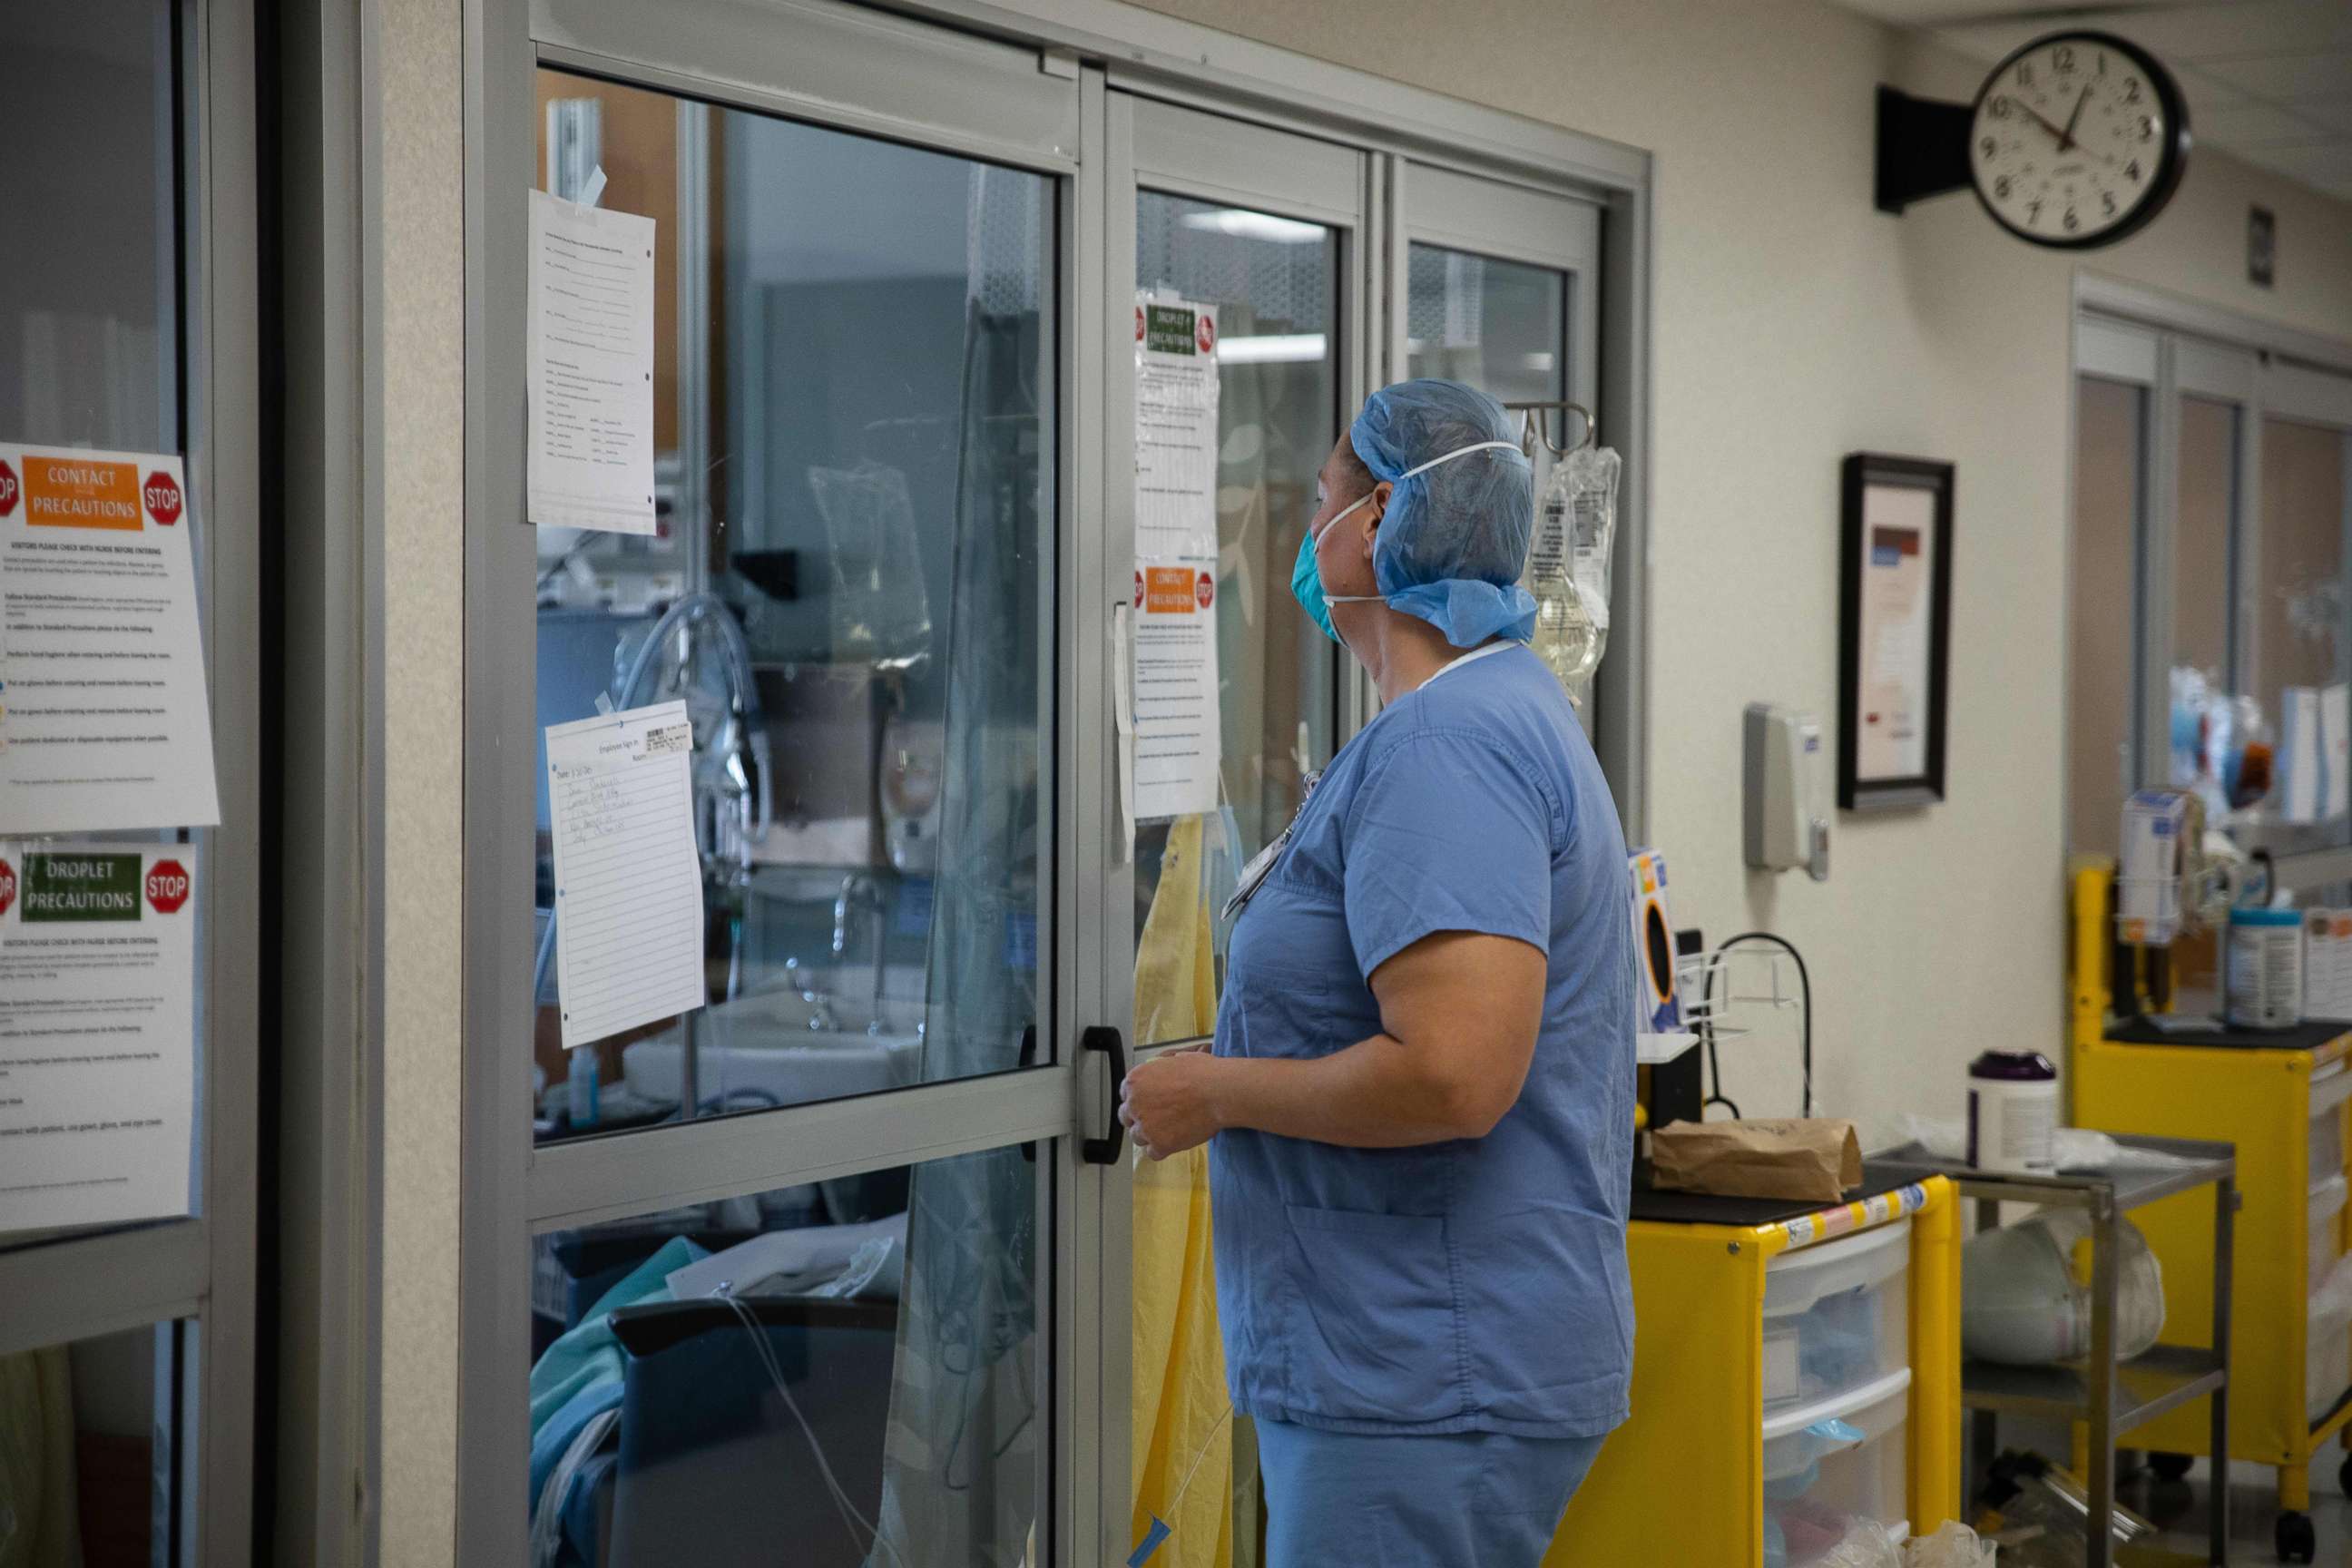 PHOTO: A healthcare professional prepares to enter a COVID-19 patient's room in the ICU at Van Wert County Hospital in Van Wert, Ohio on Nov. 20, 2020.